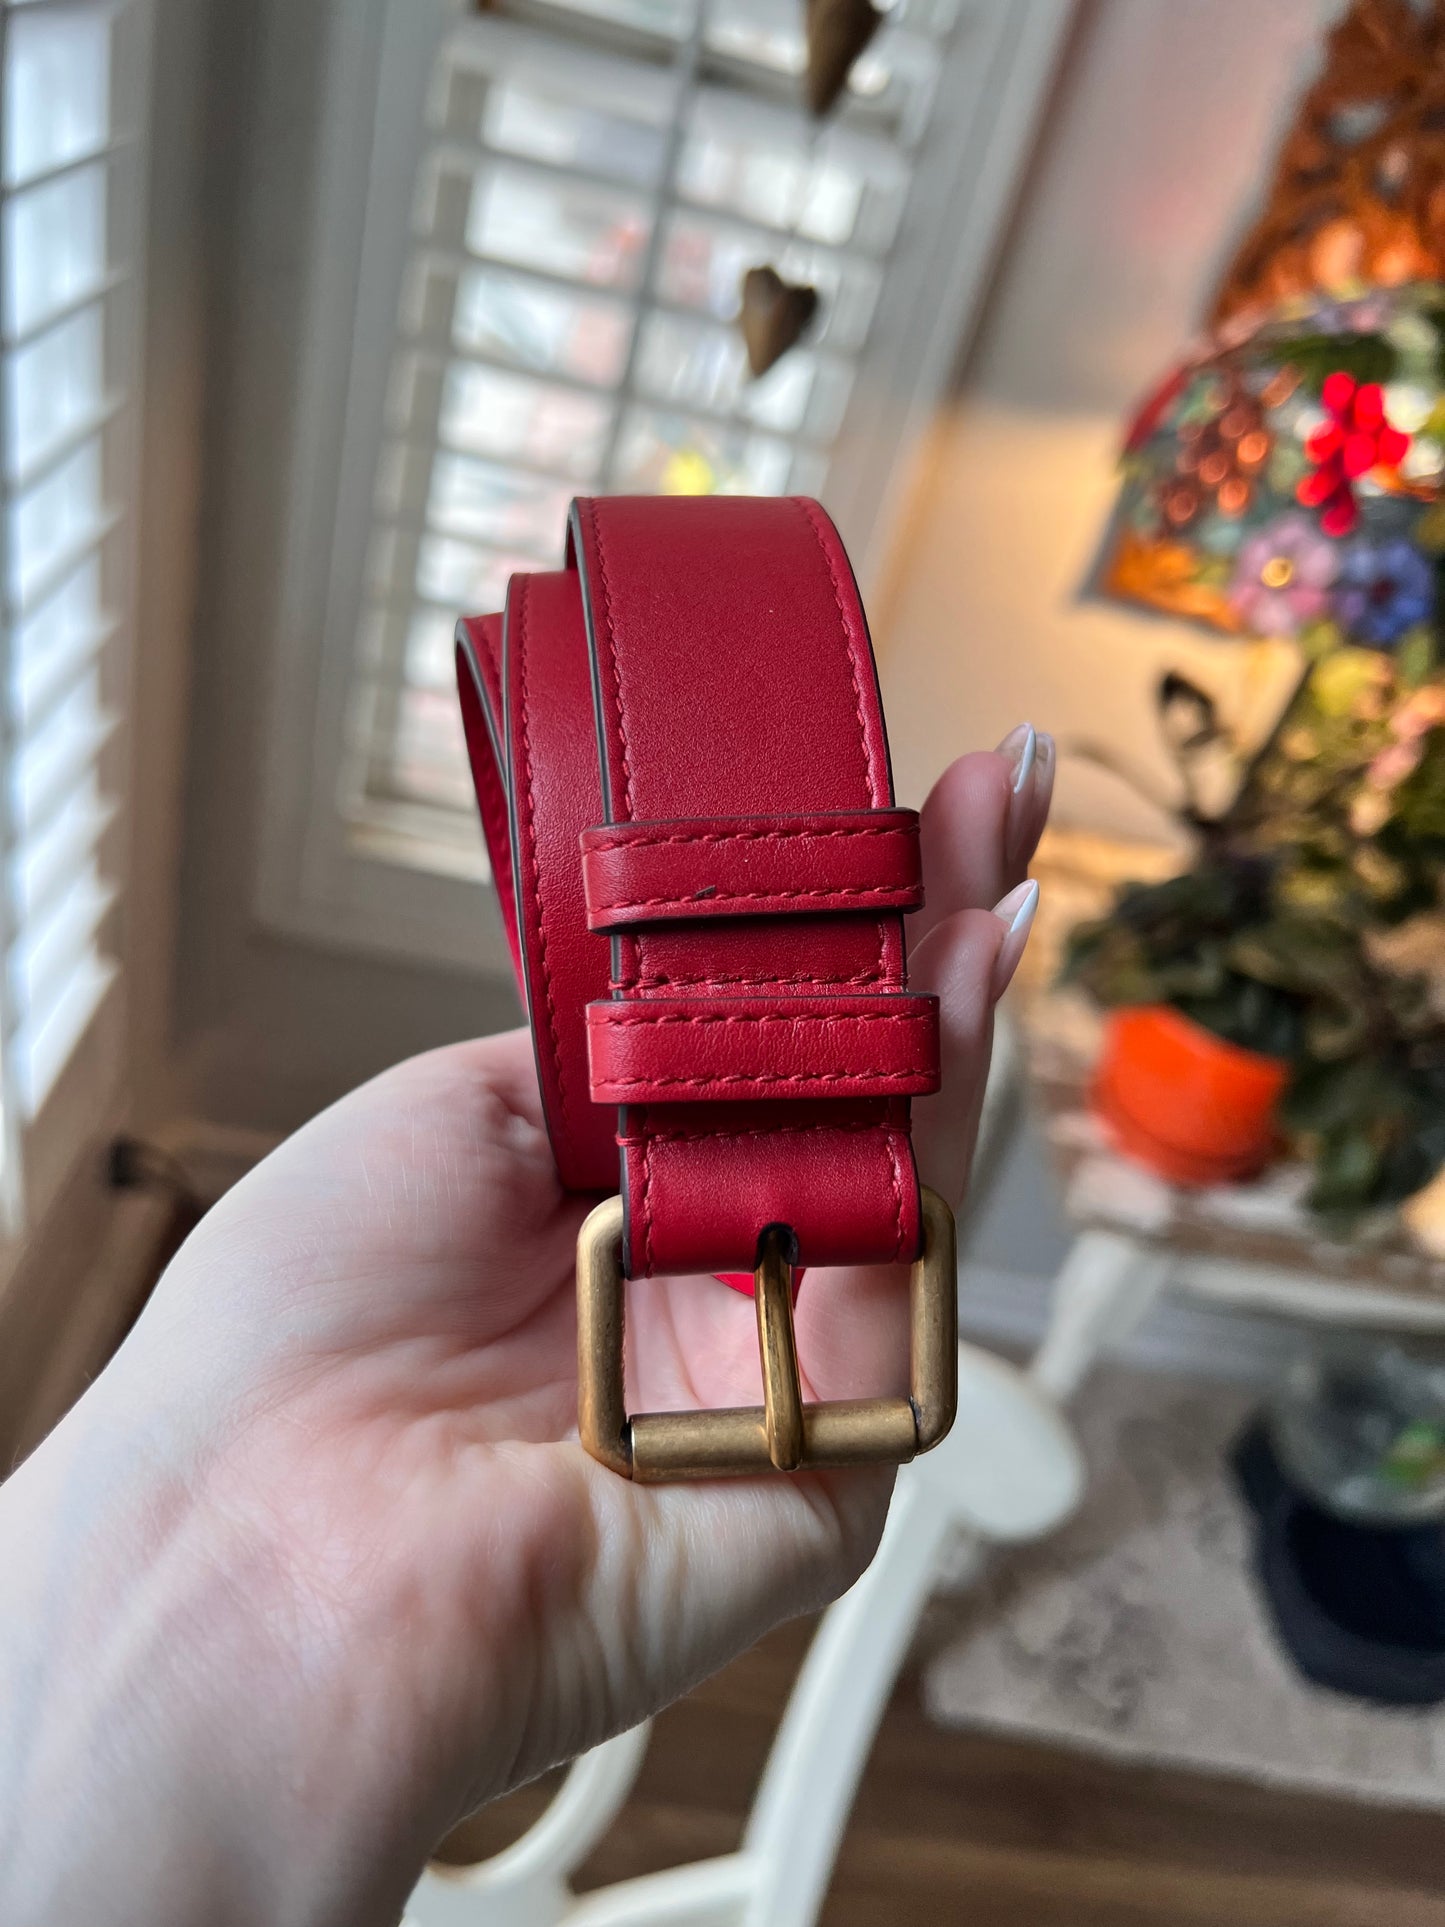 GUCCI Calfskin Matelasse GG Marmont Belt Bag size 65 or 26 in Hibiscus Red